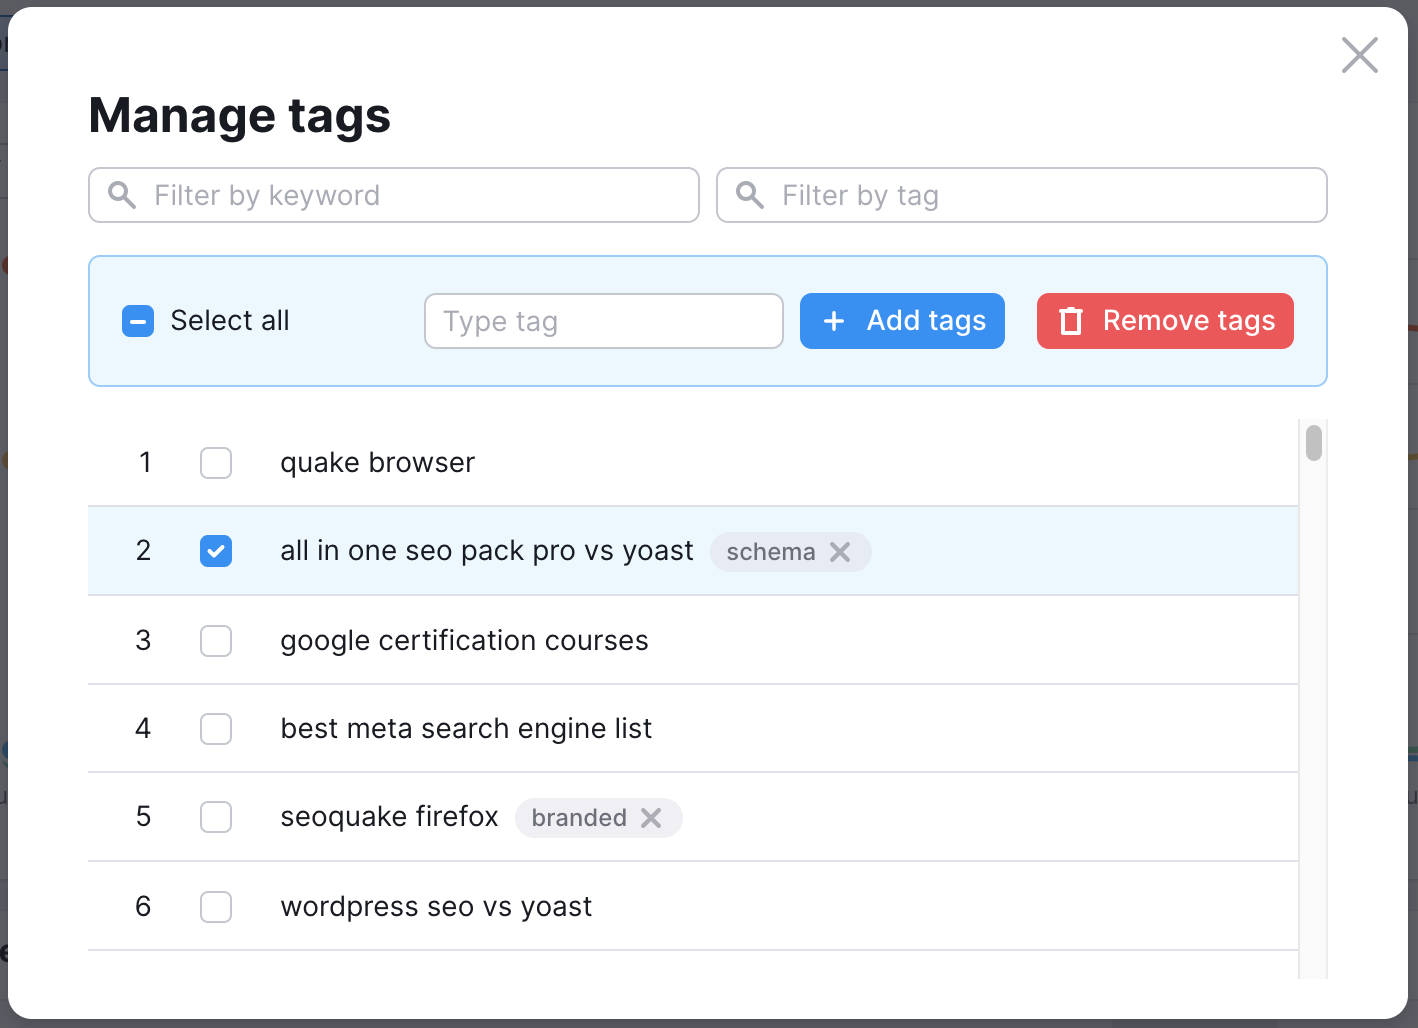 Manage tags dashboard showing the option to filter tags/keywords and add/remove tags in bulk.